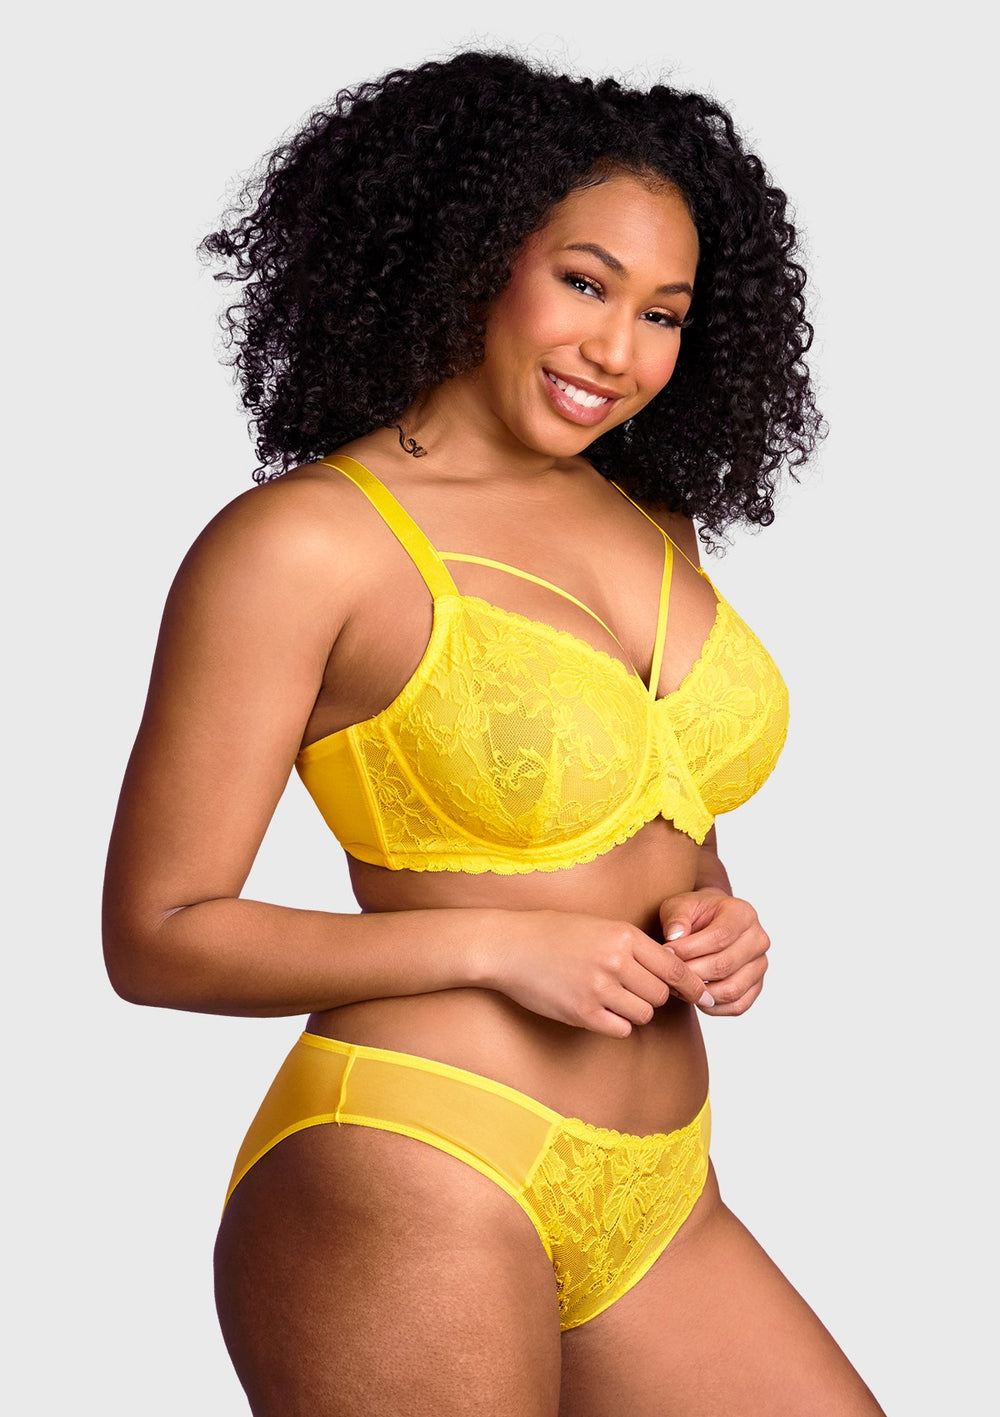 Israelite 👑, Hey Besties 👋🏾🥰 Click The Link In My Bio and get you a  @hsialife.official bra to support your Big Ol' Boobies 😘. #hsia #h